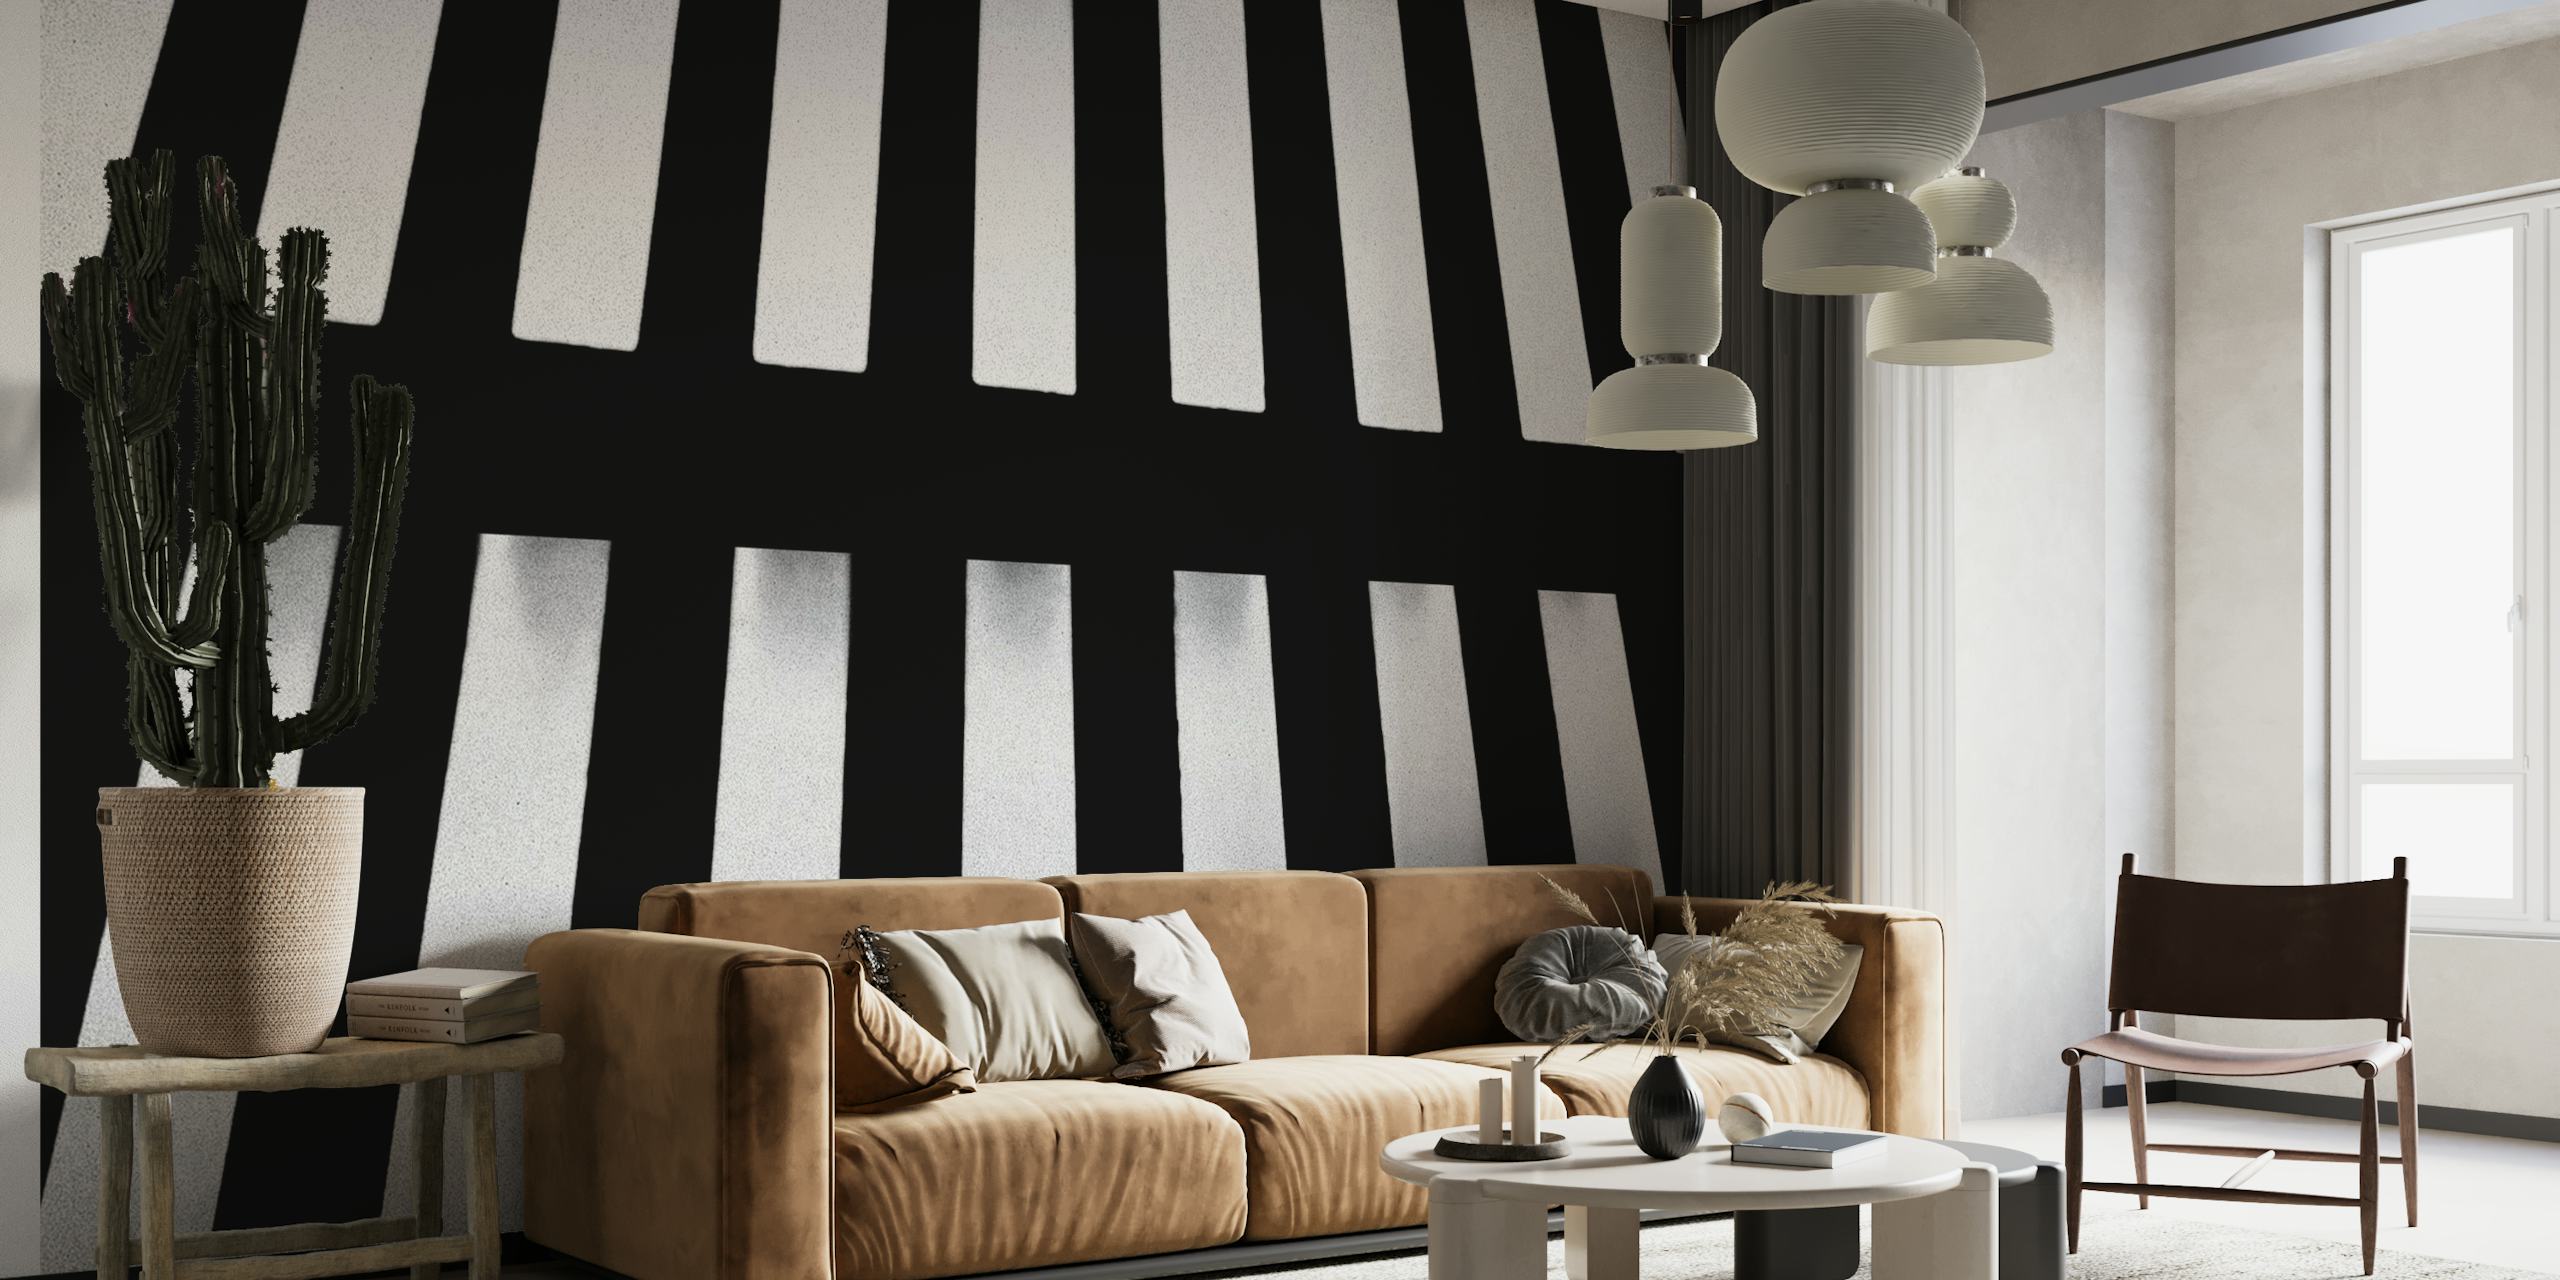 Black and white geometric striped wall mural creating an optical illusion